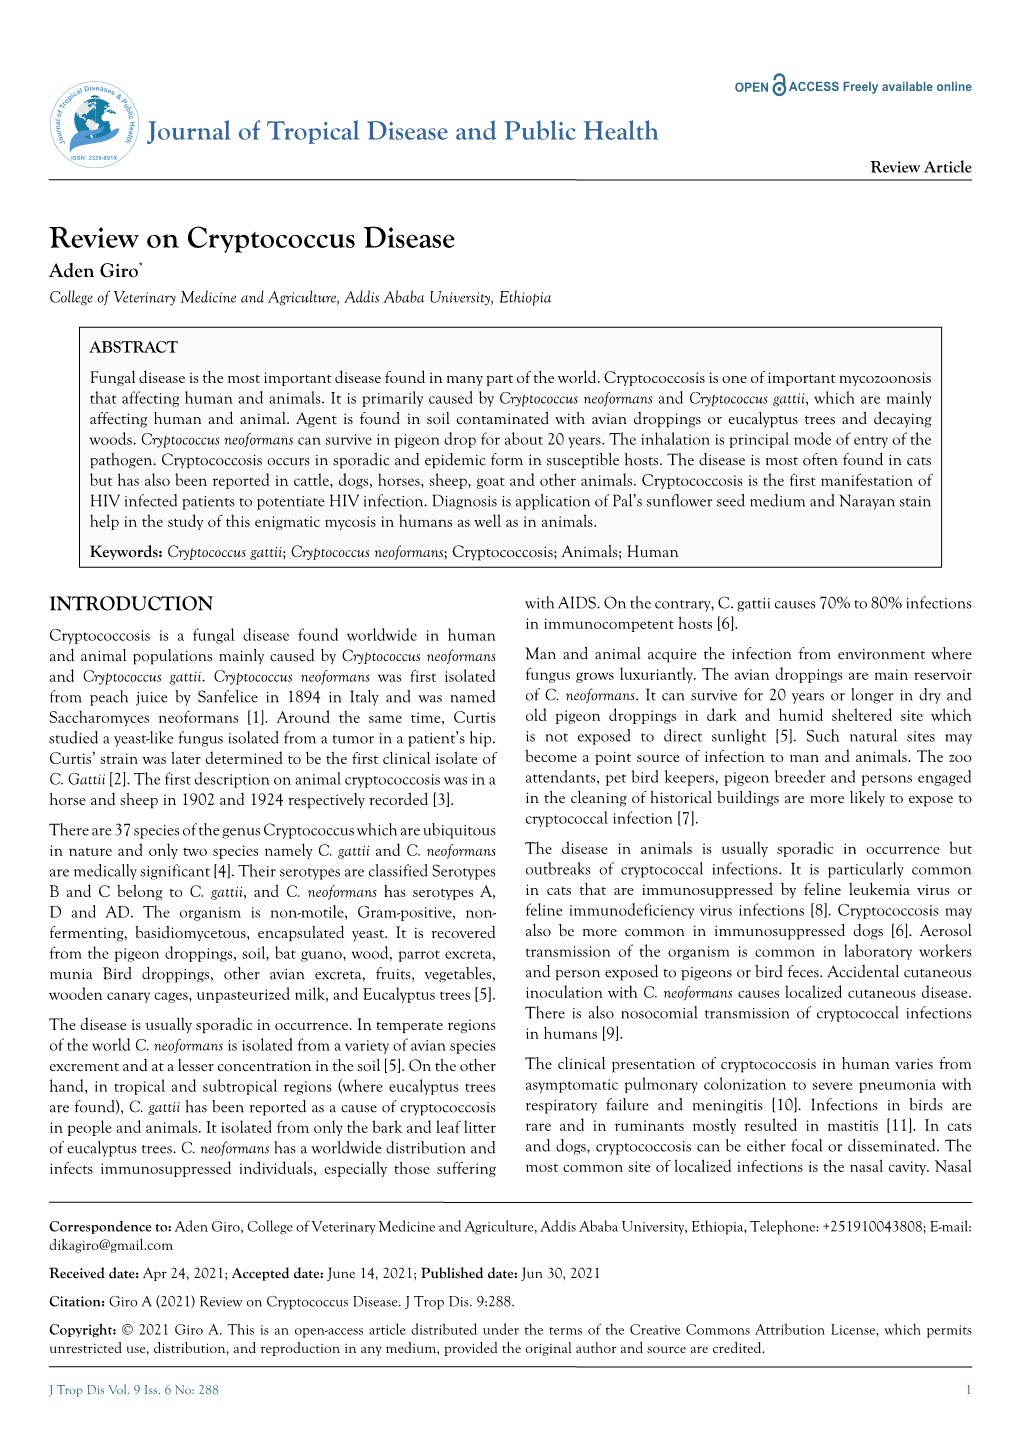 Review on Cryptococcus Disease Aden Giro* College of Veterinary Medicine and Agriculture, Addis Ababa University, Ethiopia